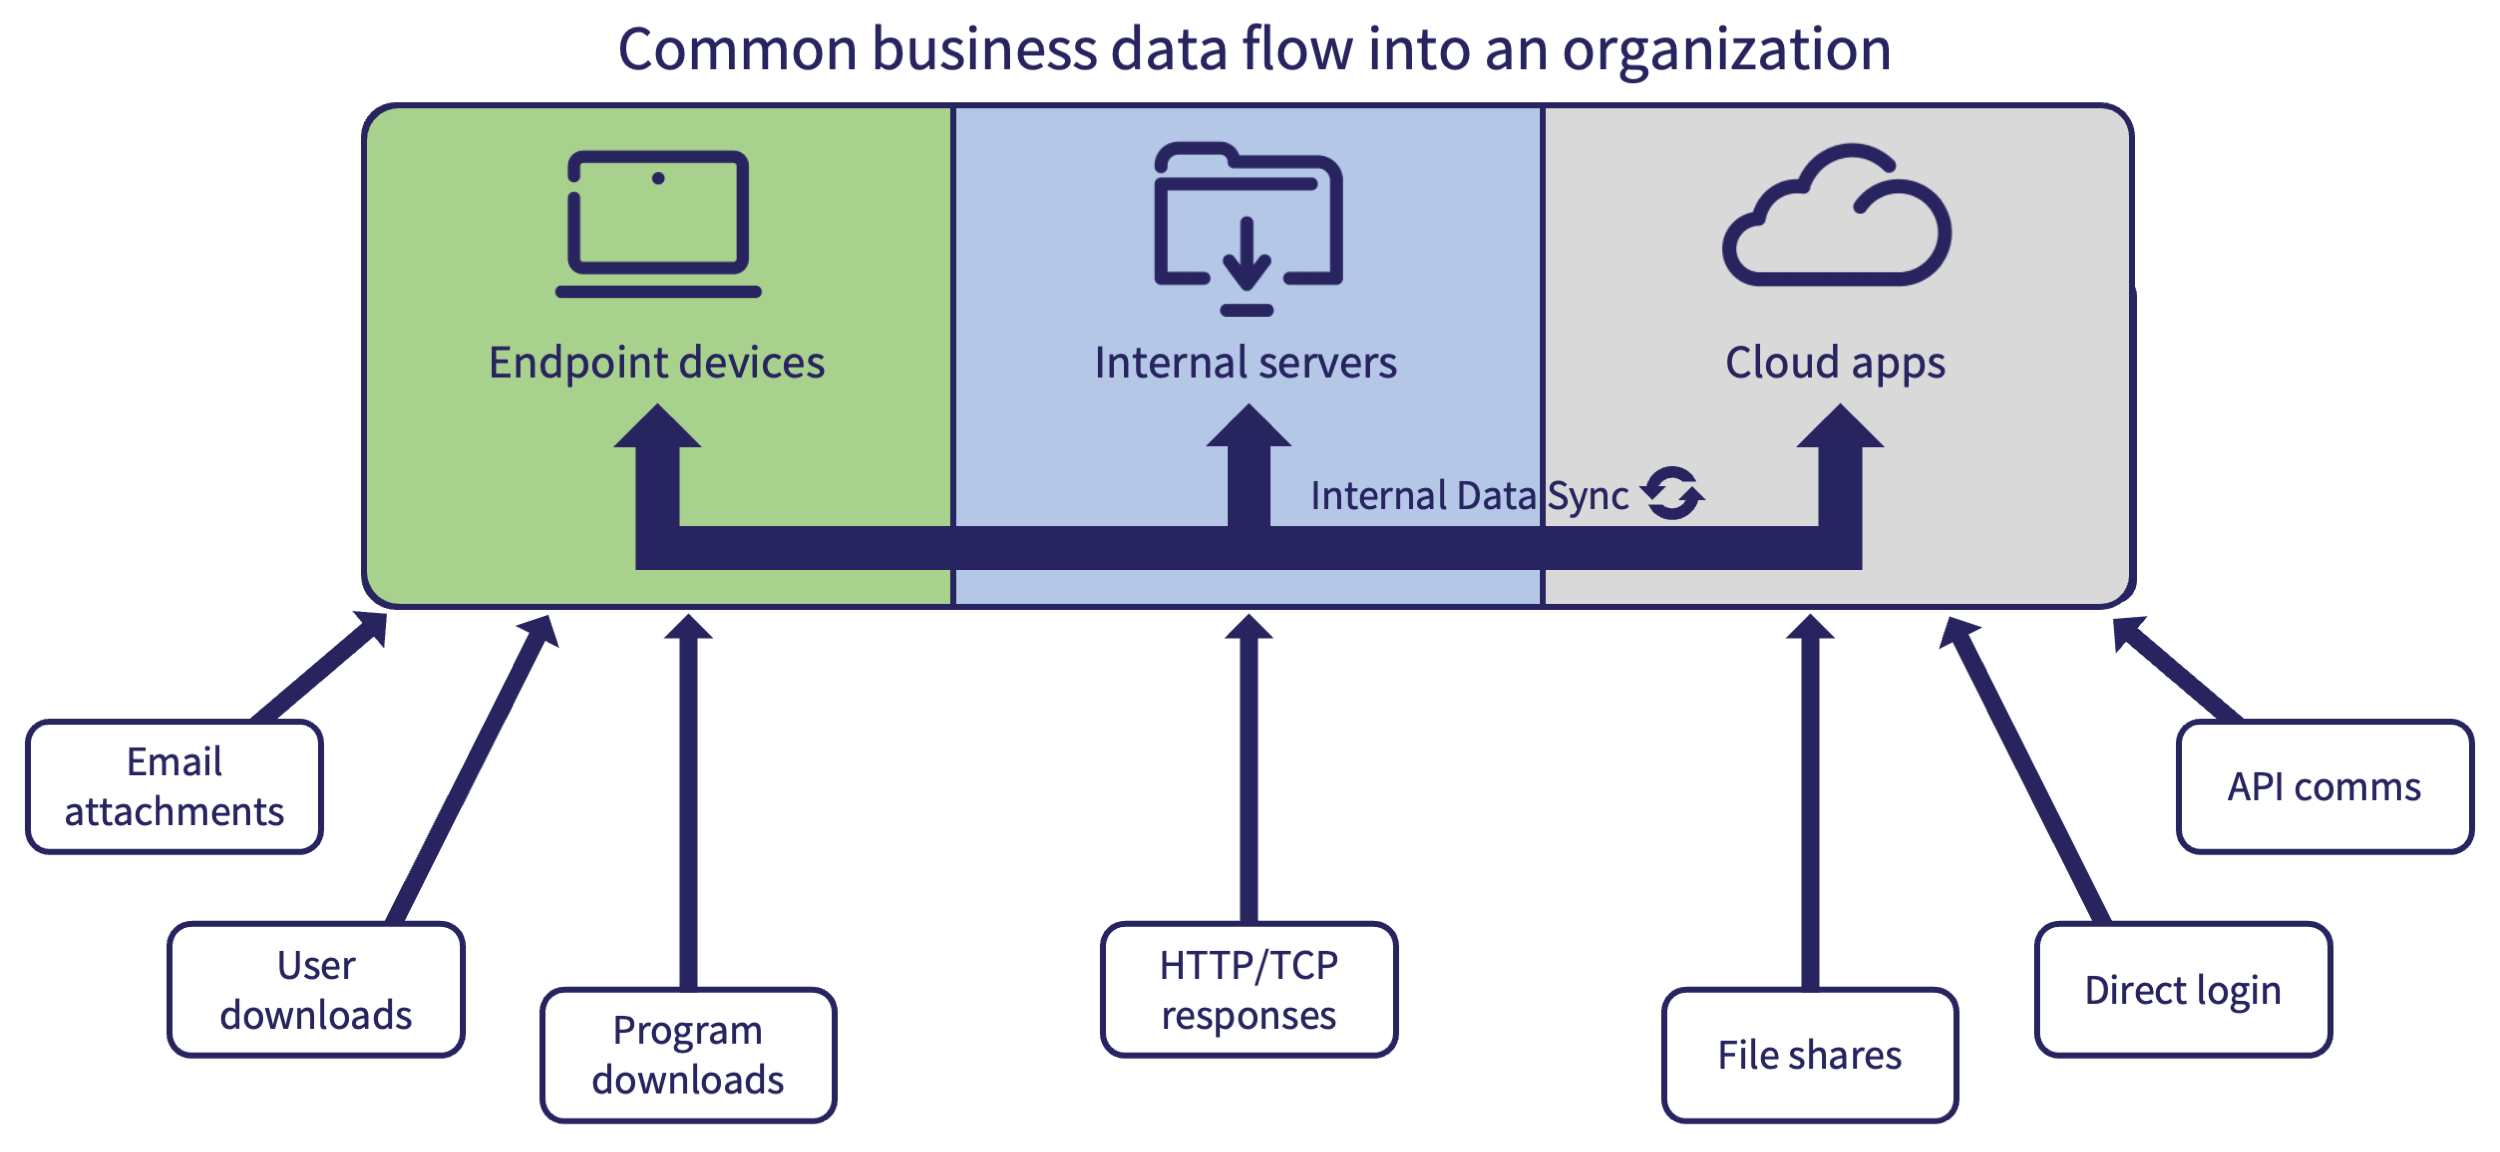 Common business data flow into an organization